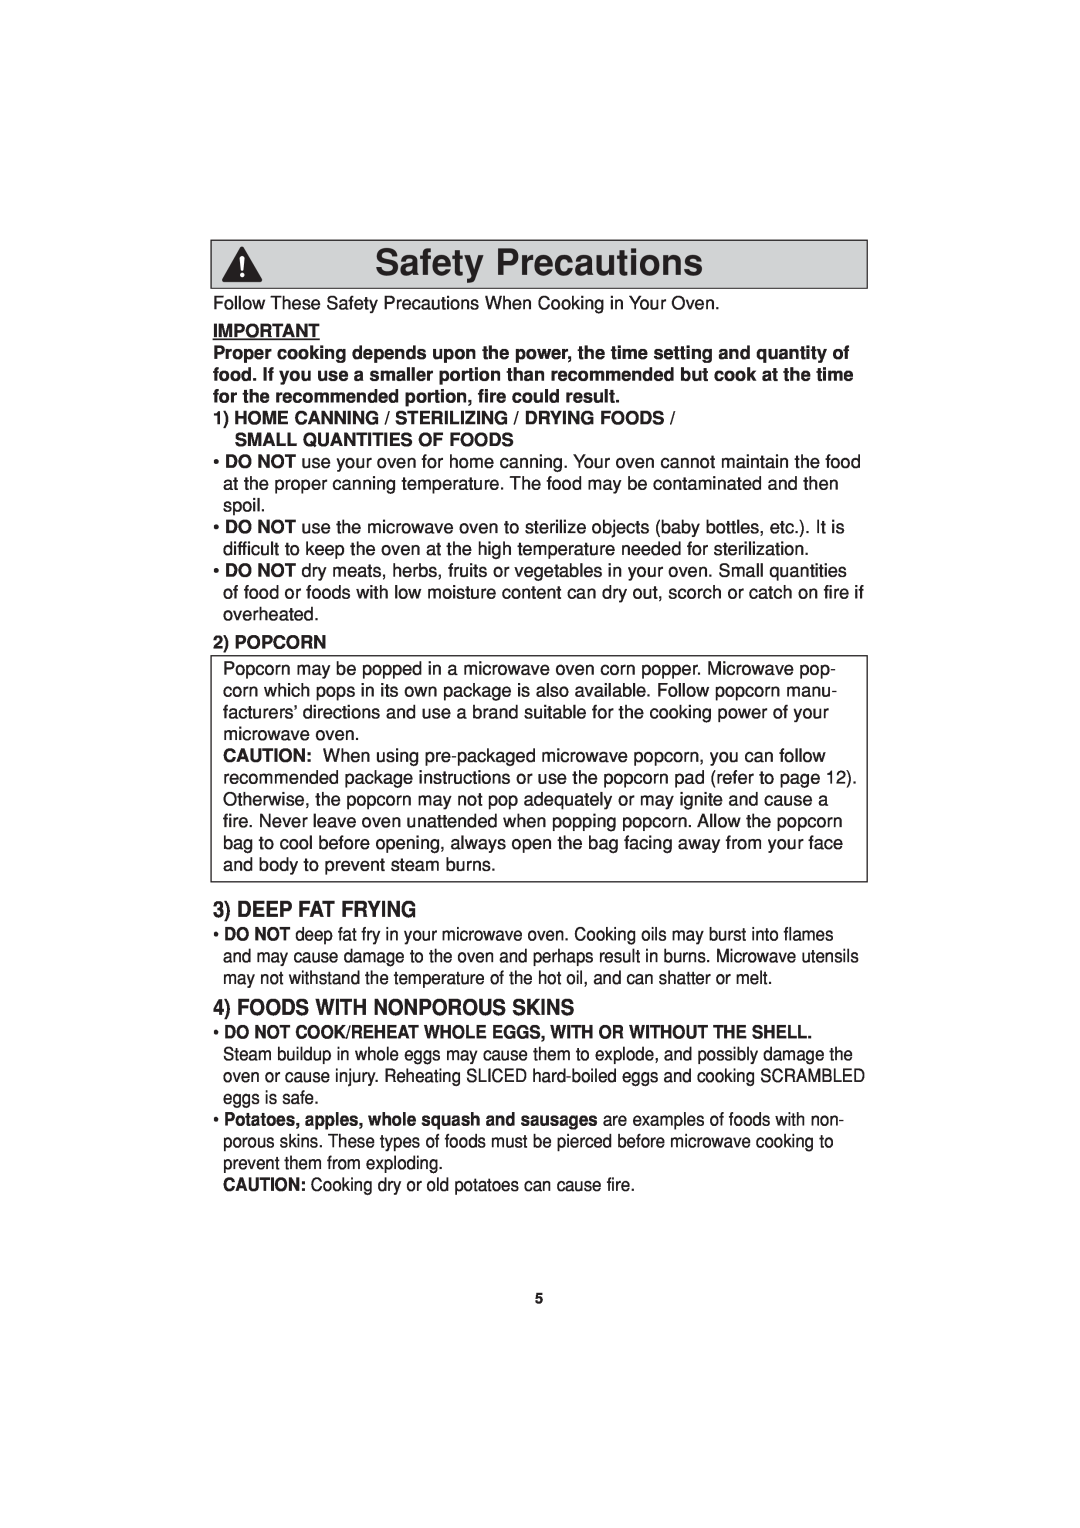 Panasonic NN-H624 operating instructions Safety Precautions, Deep Fat Frying, Foods With Nonporous Skins 